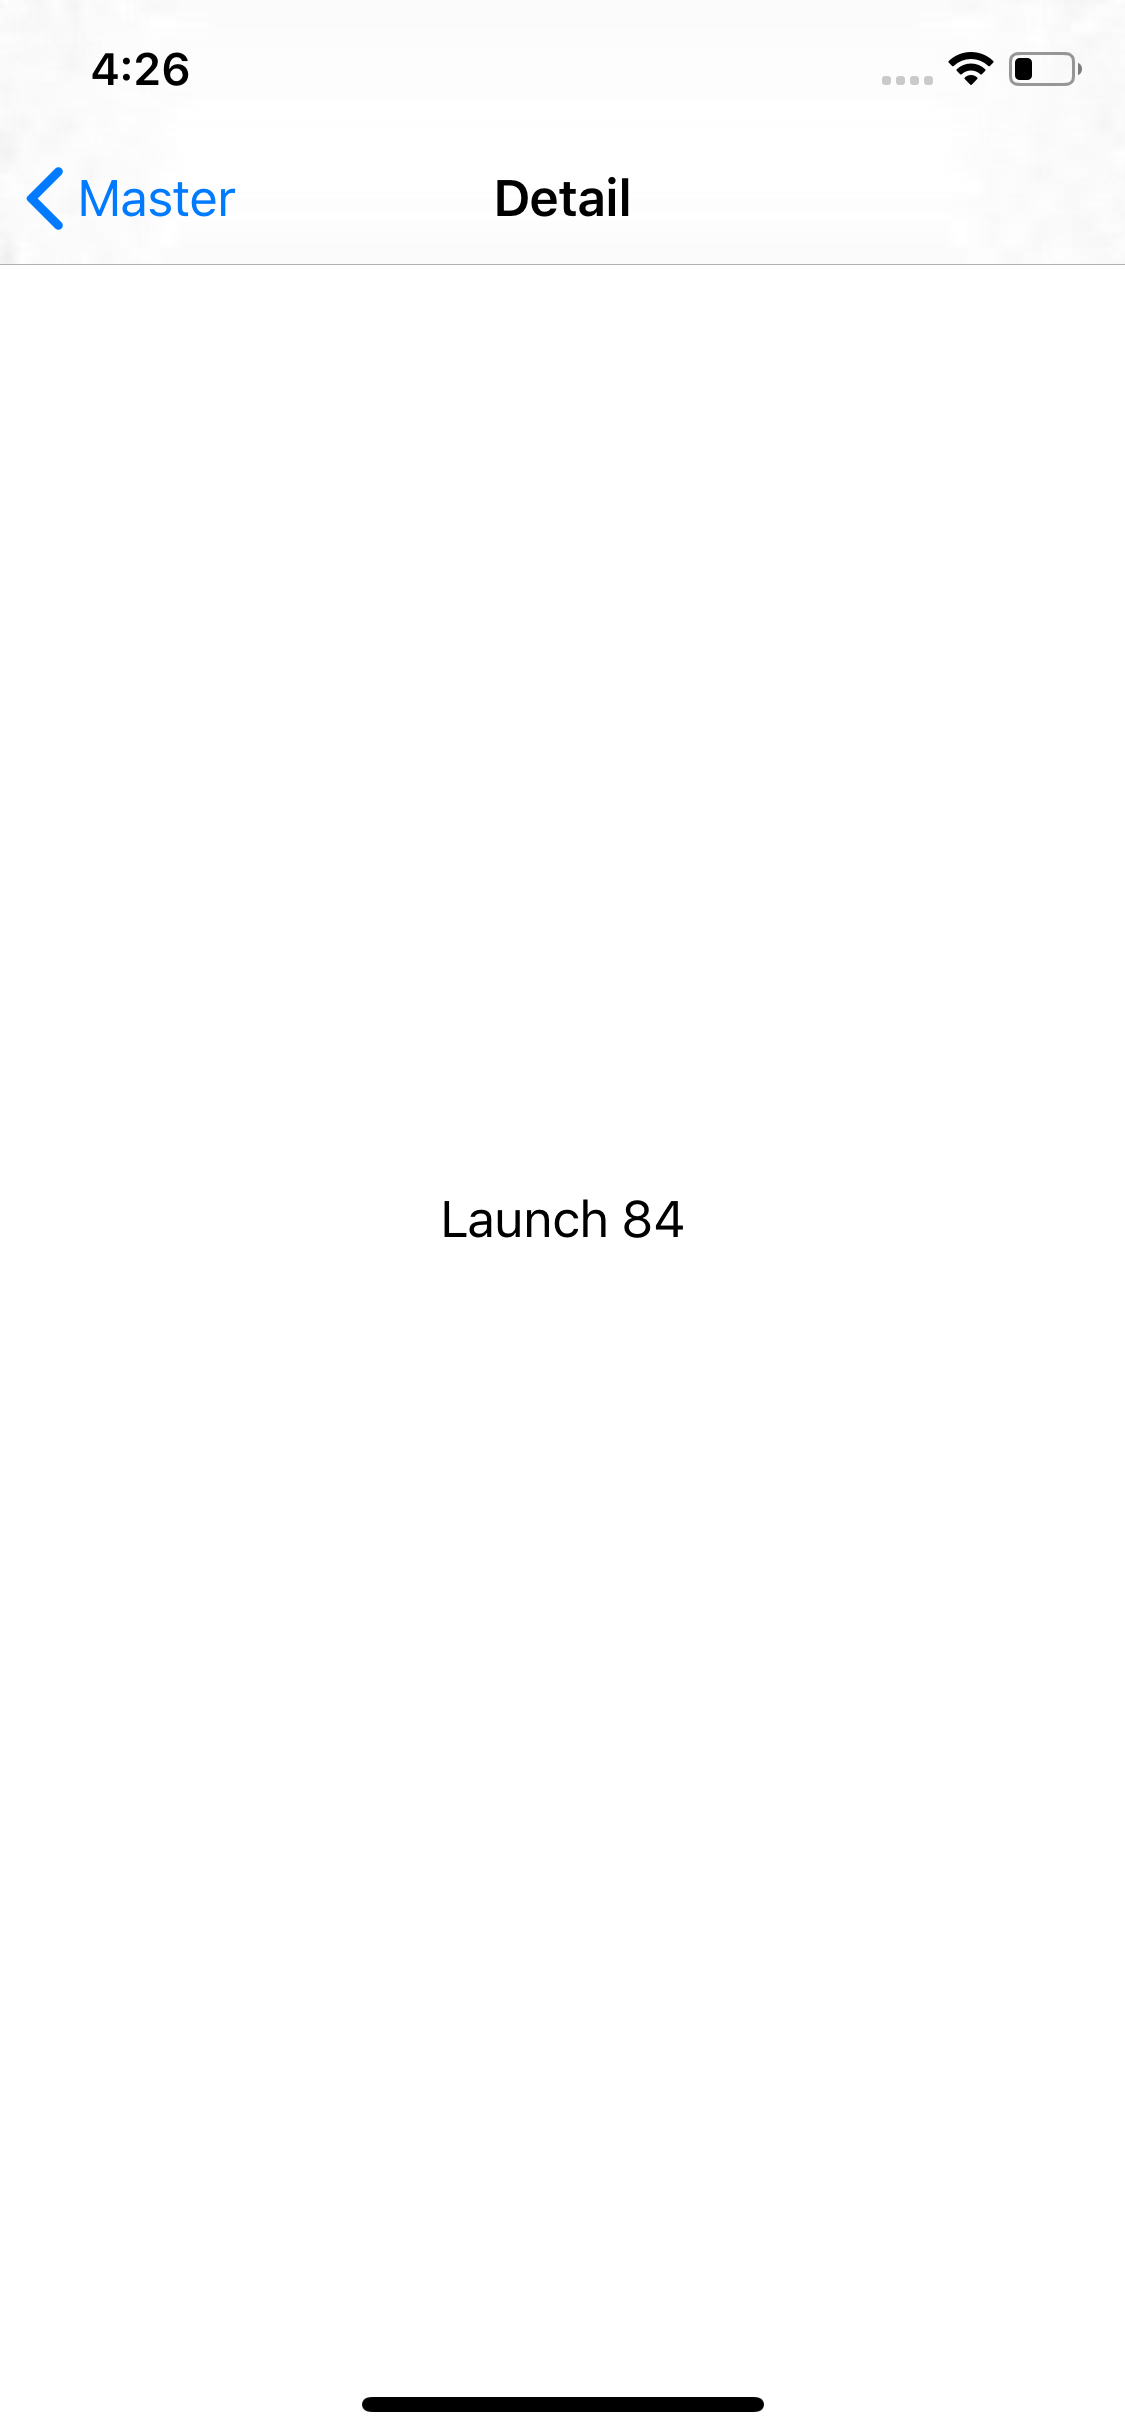 Empty screen with launch ID